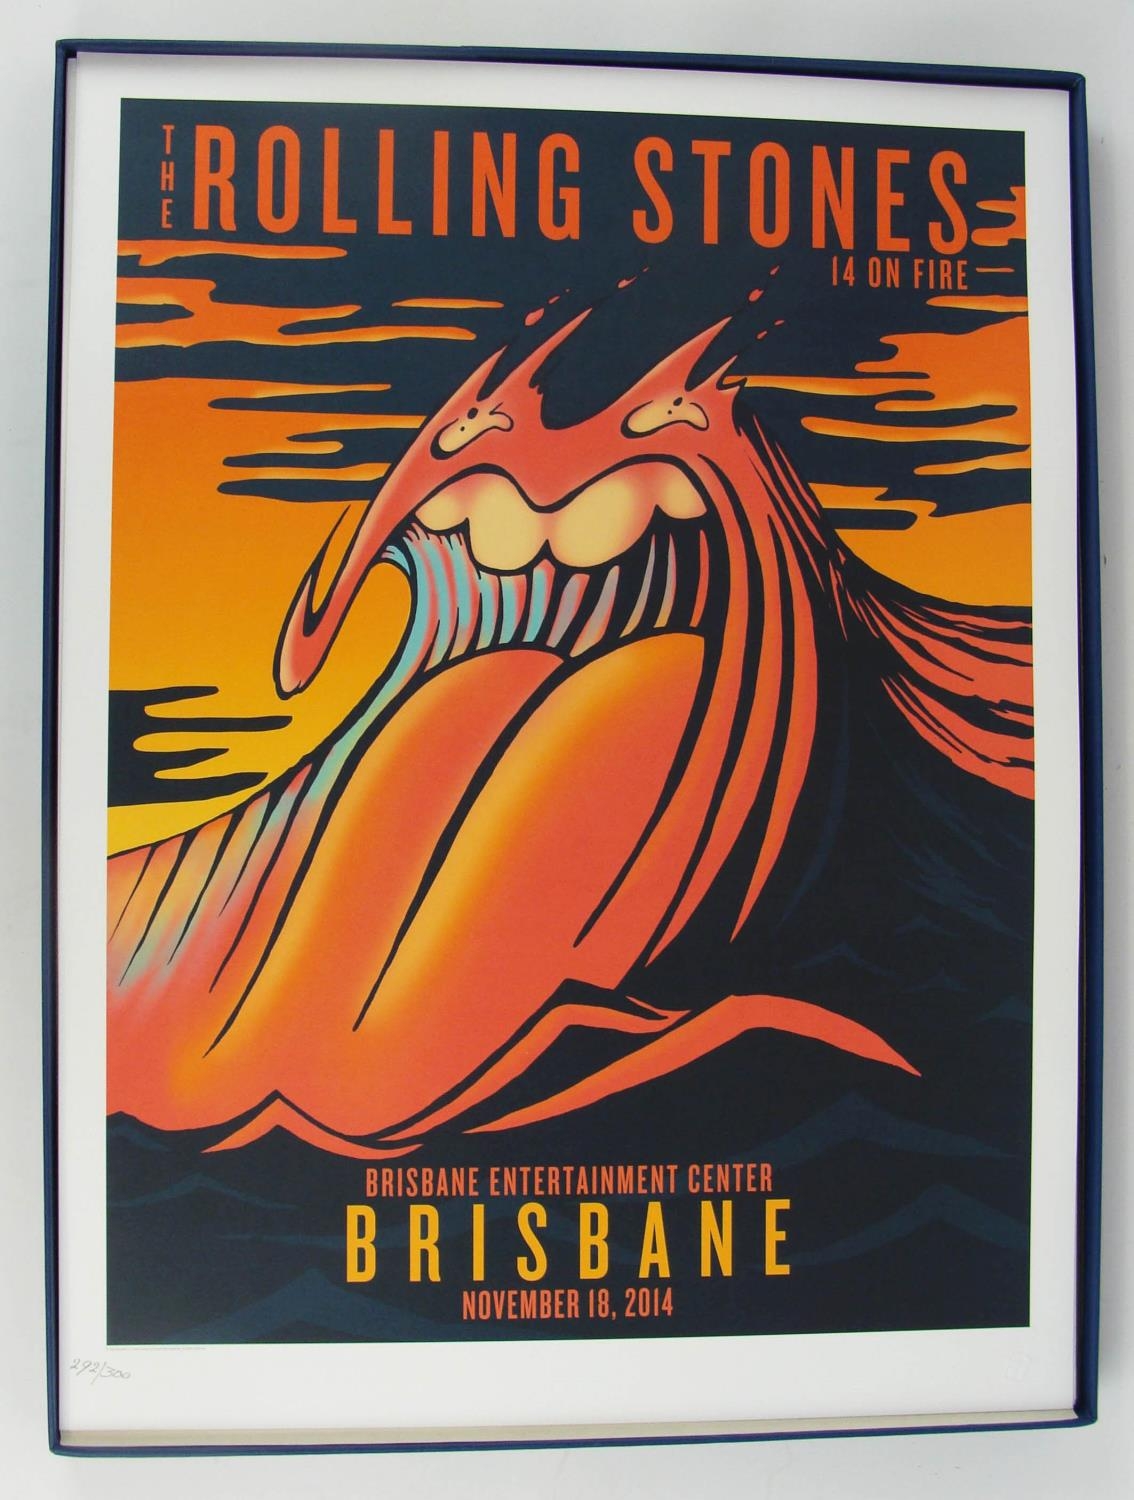 ROLLING STONES '14 on FIRE' BOX SET, of 13 lithographic posters from the 2014 Australia and New - Image 18 of 21